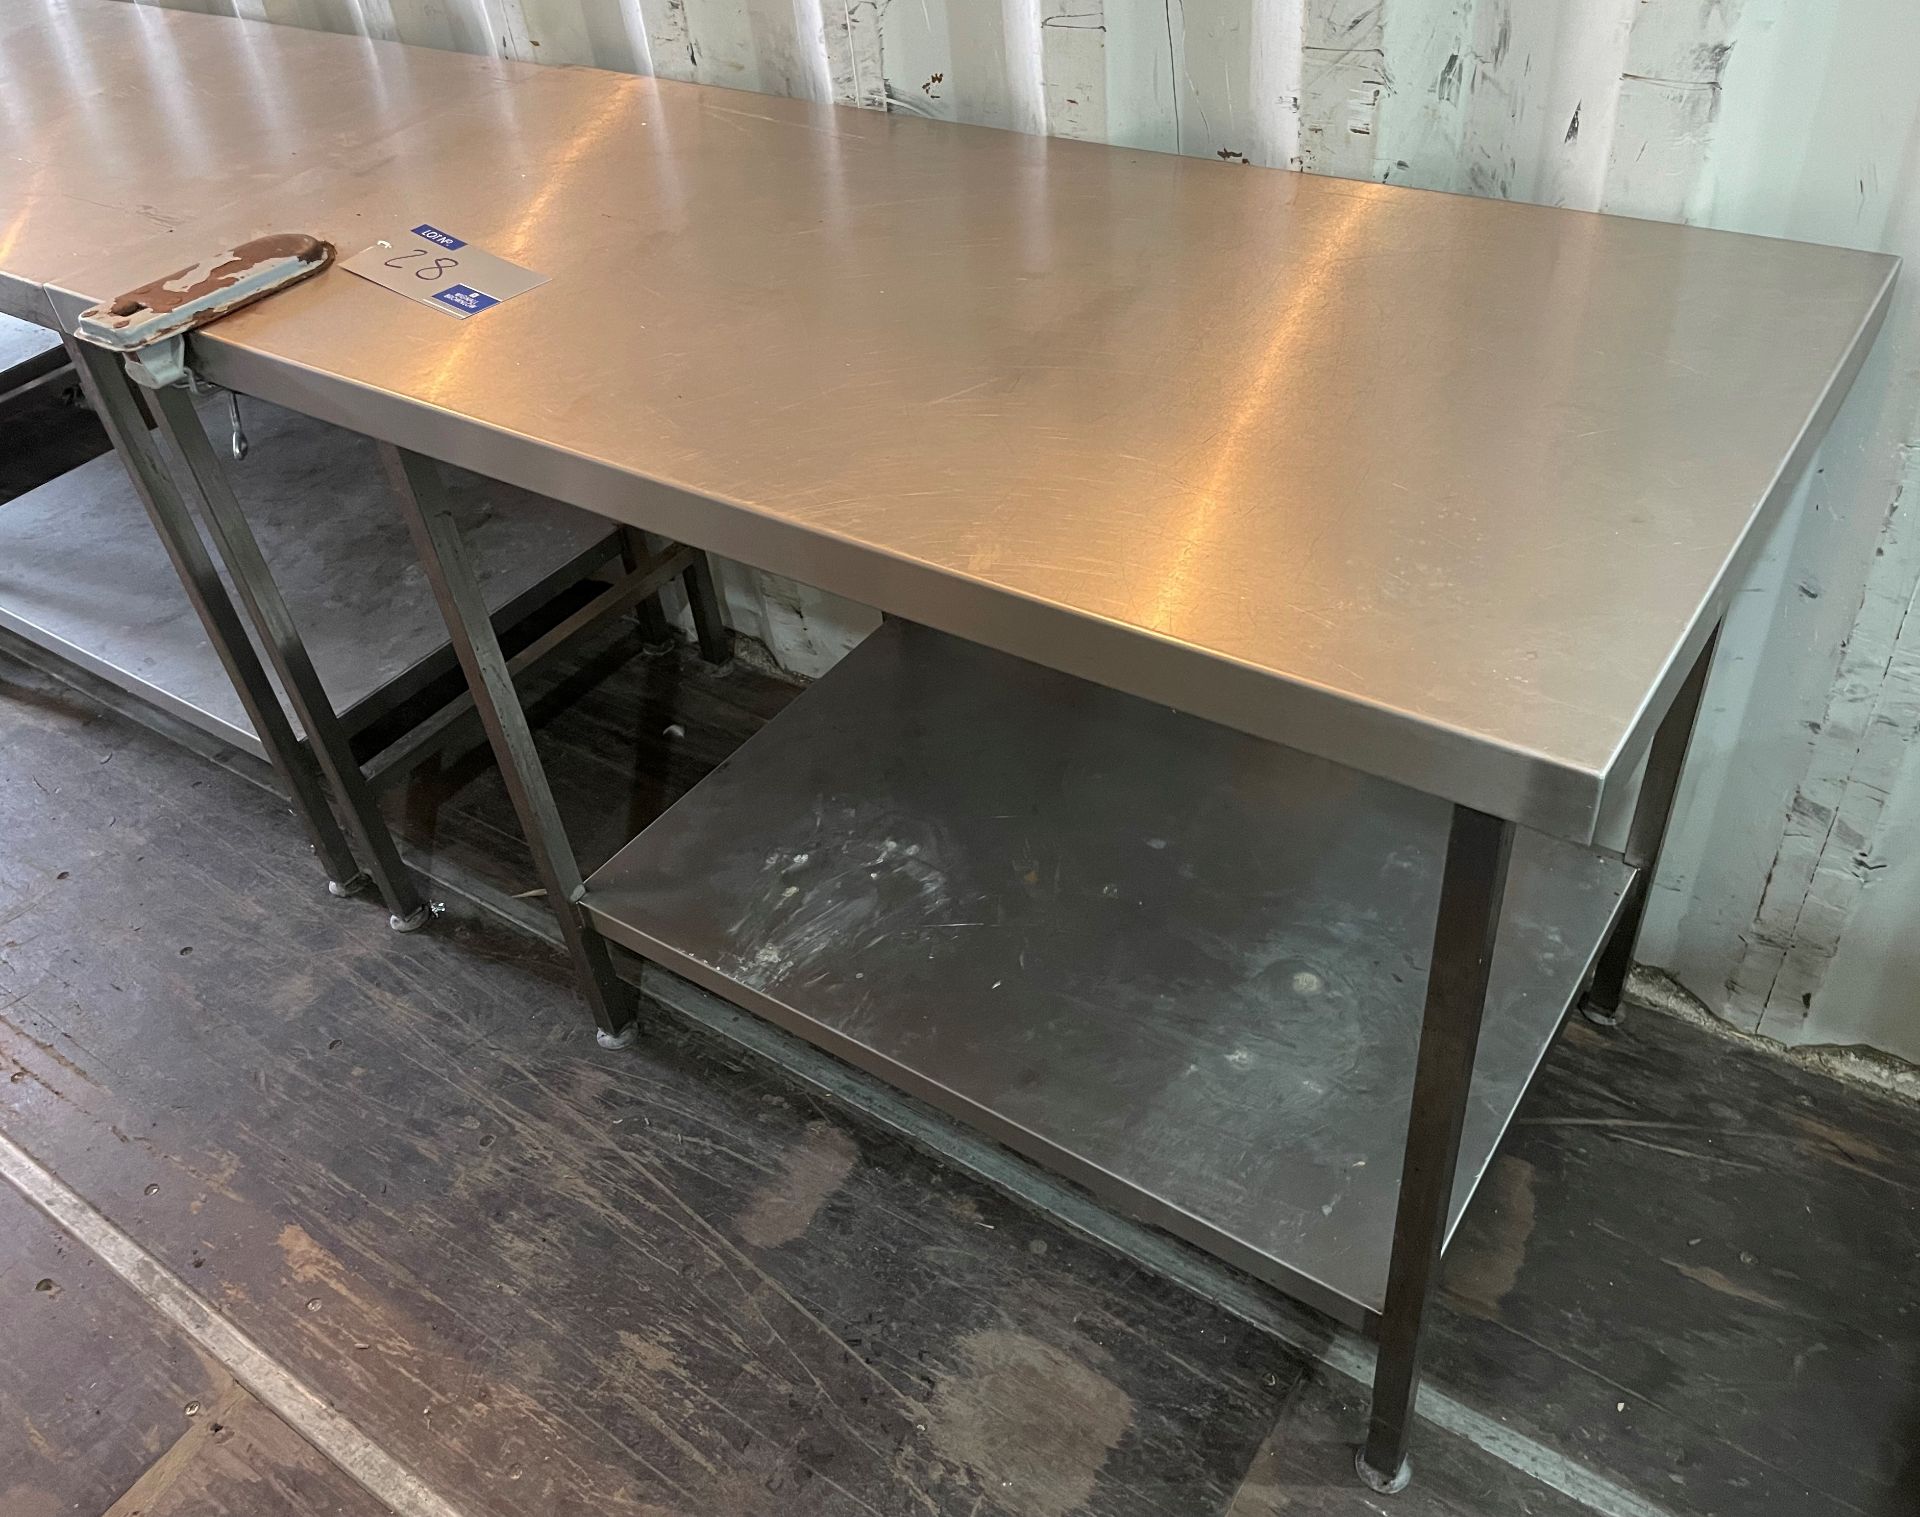 A Stainless Steel Food Preparation Bench, 150cm x 70cm x 90cm with undershelf (located at EMS